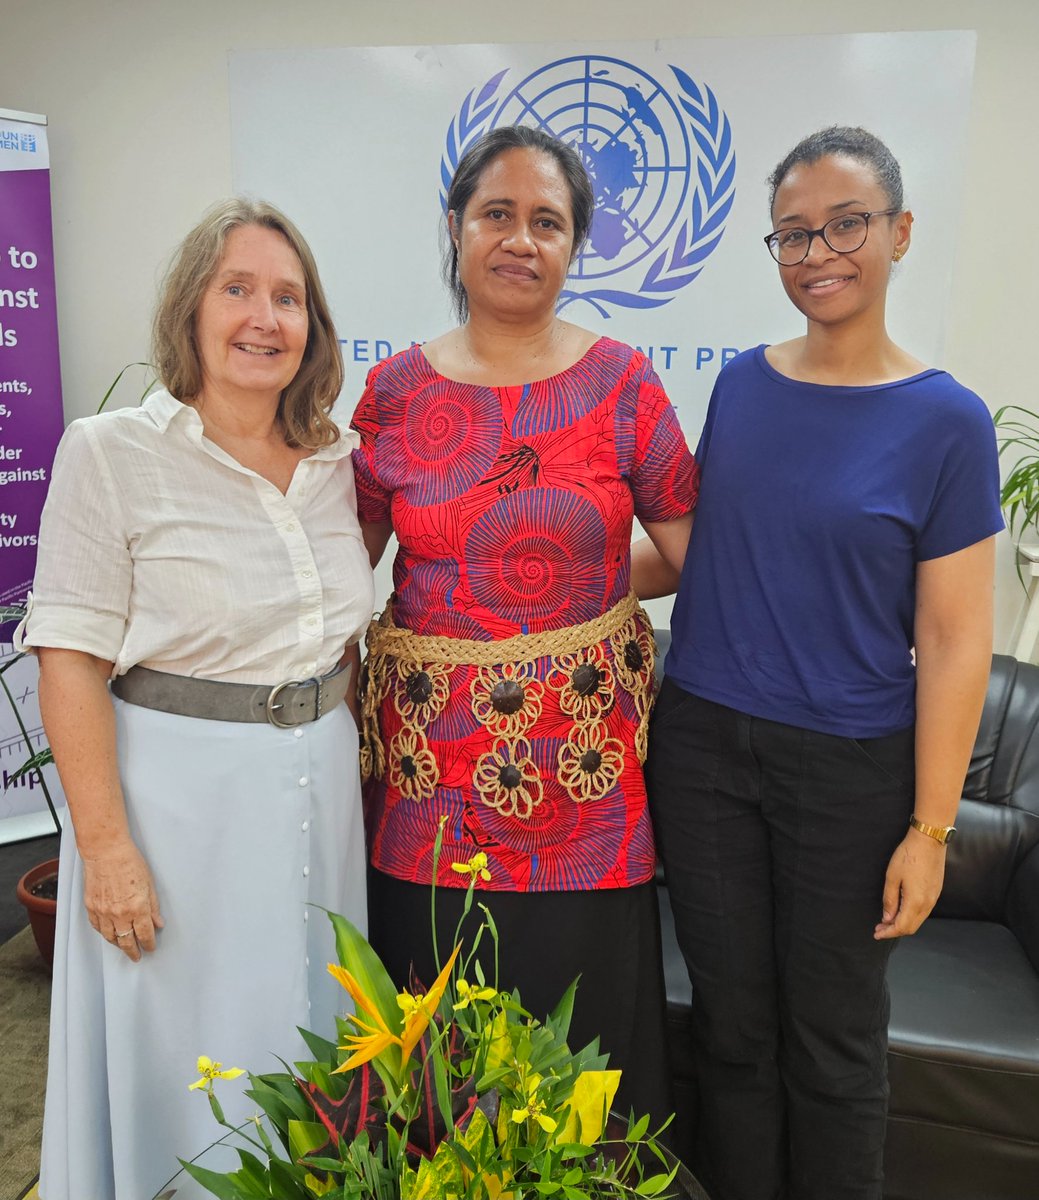 About Monday, joined discussions on gender equality and culture with UNFPA Tonga and Acting British High Commissoner to Tonga #rightsfreedompotential #inspiringwomen